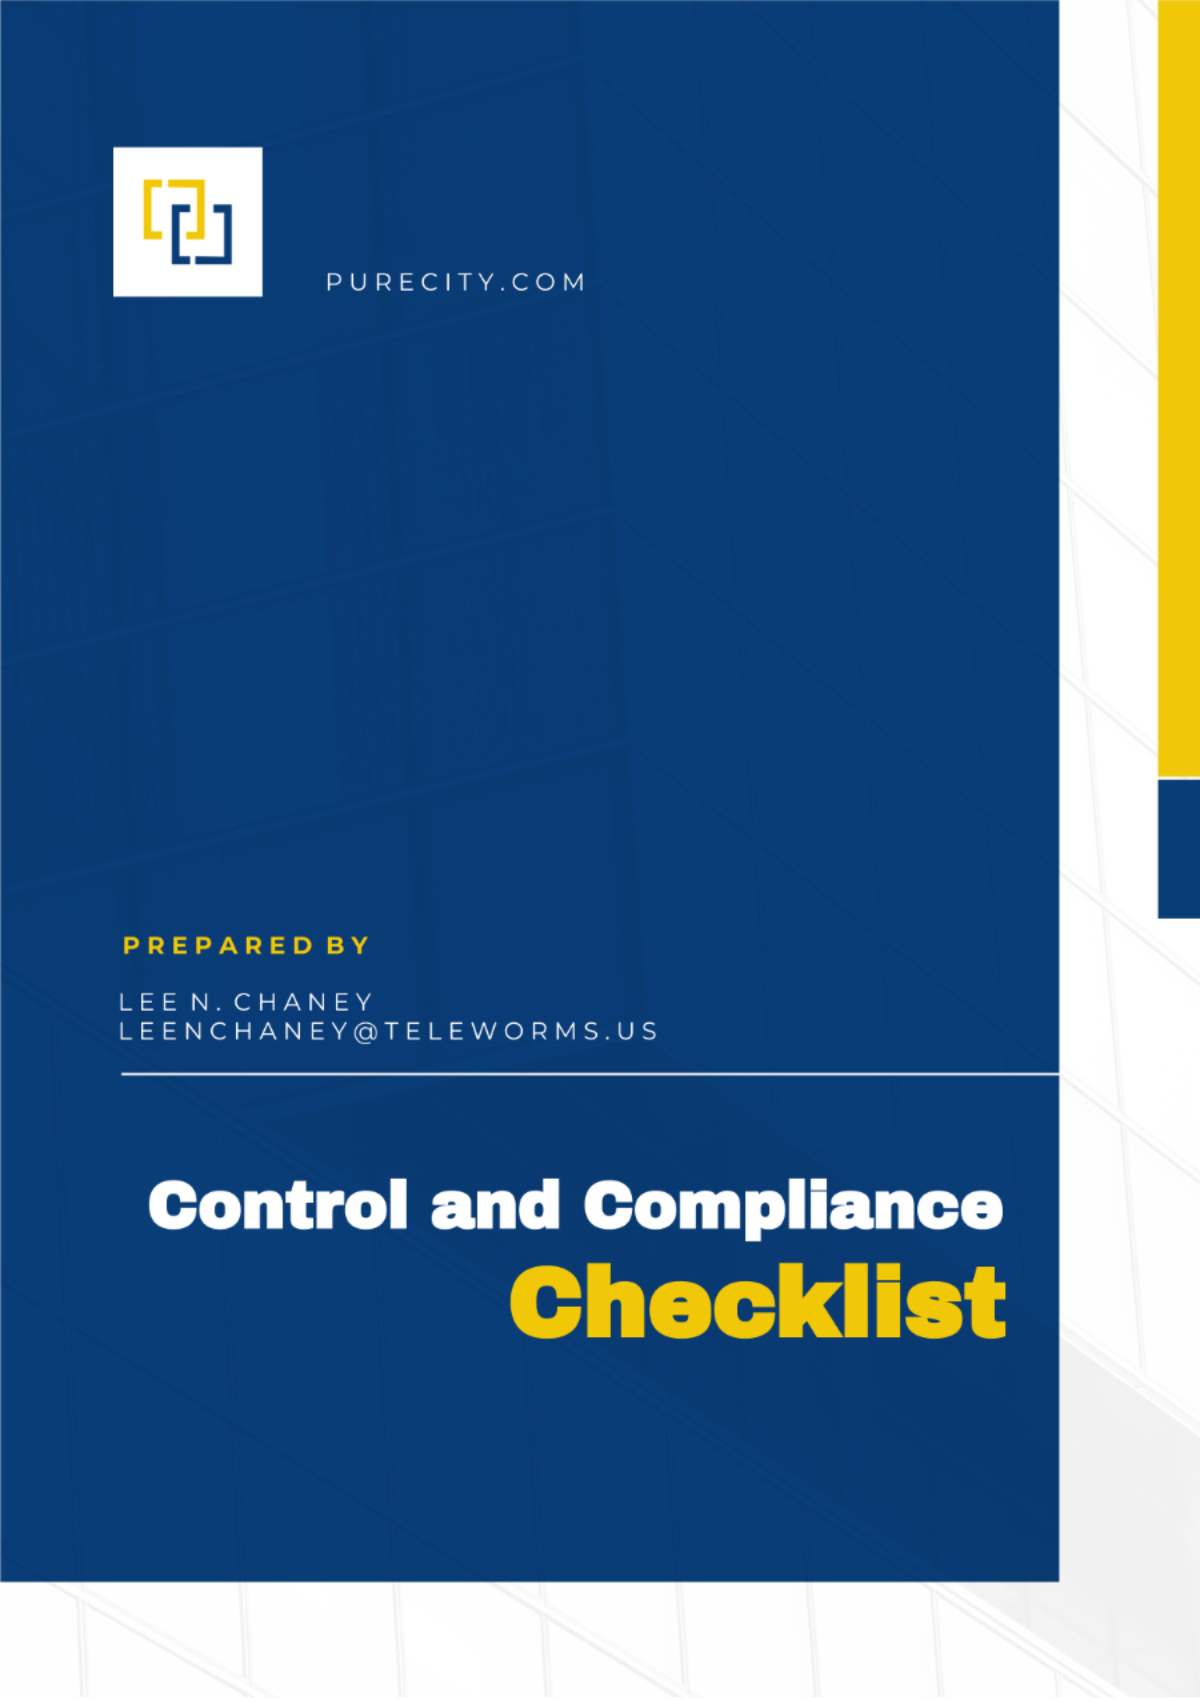 Control and Compliance Checklist Template